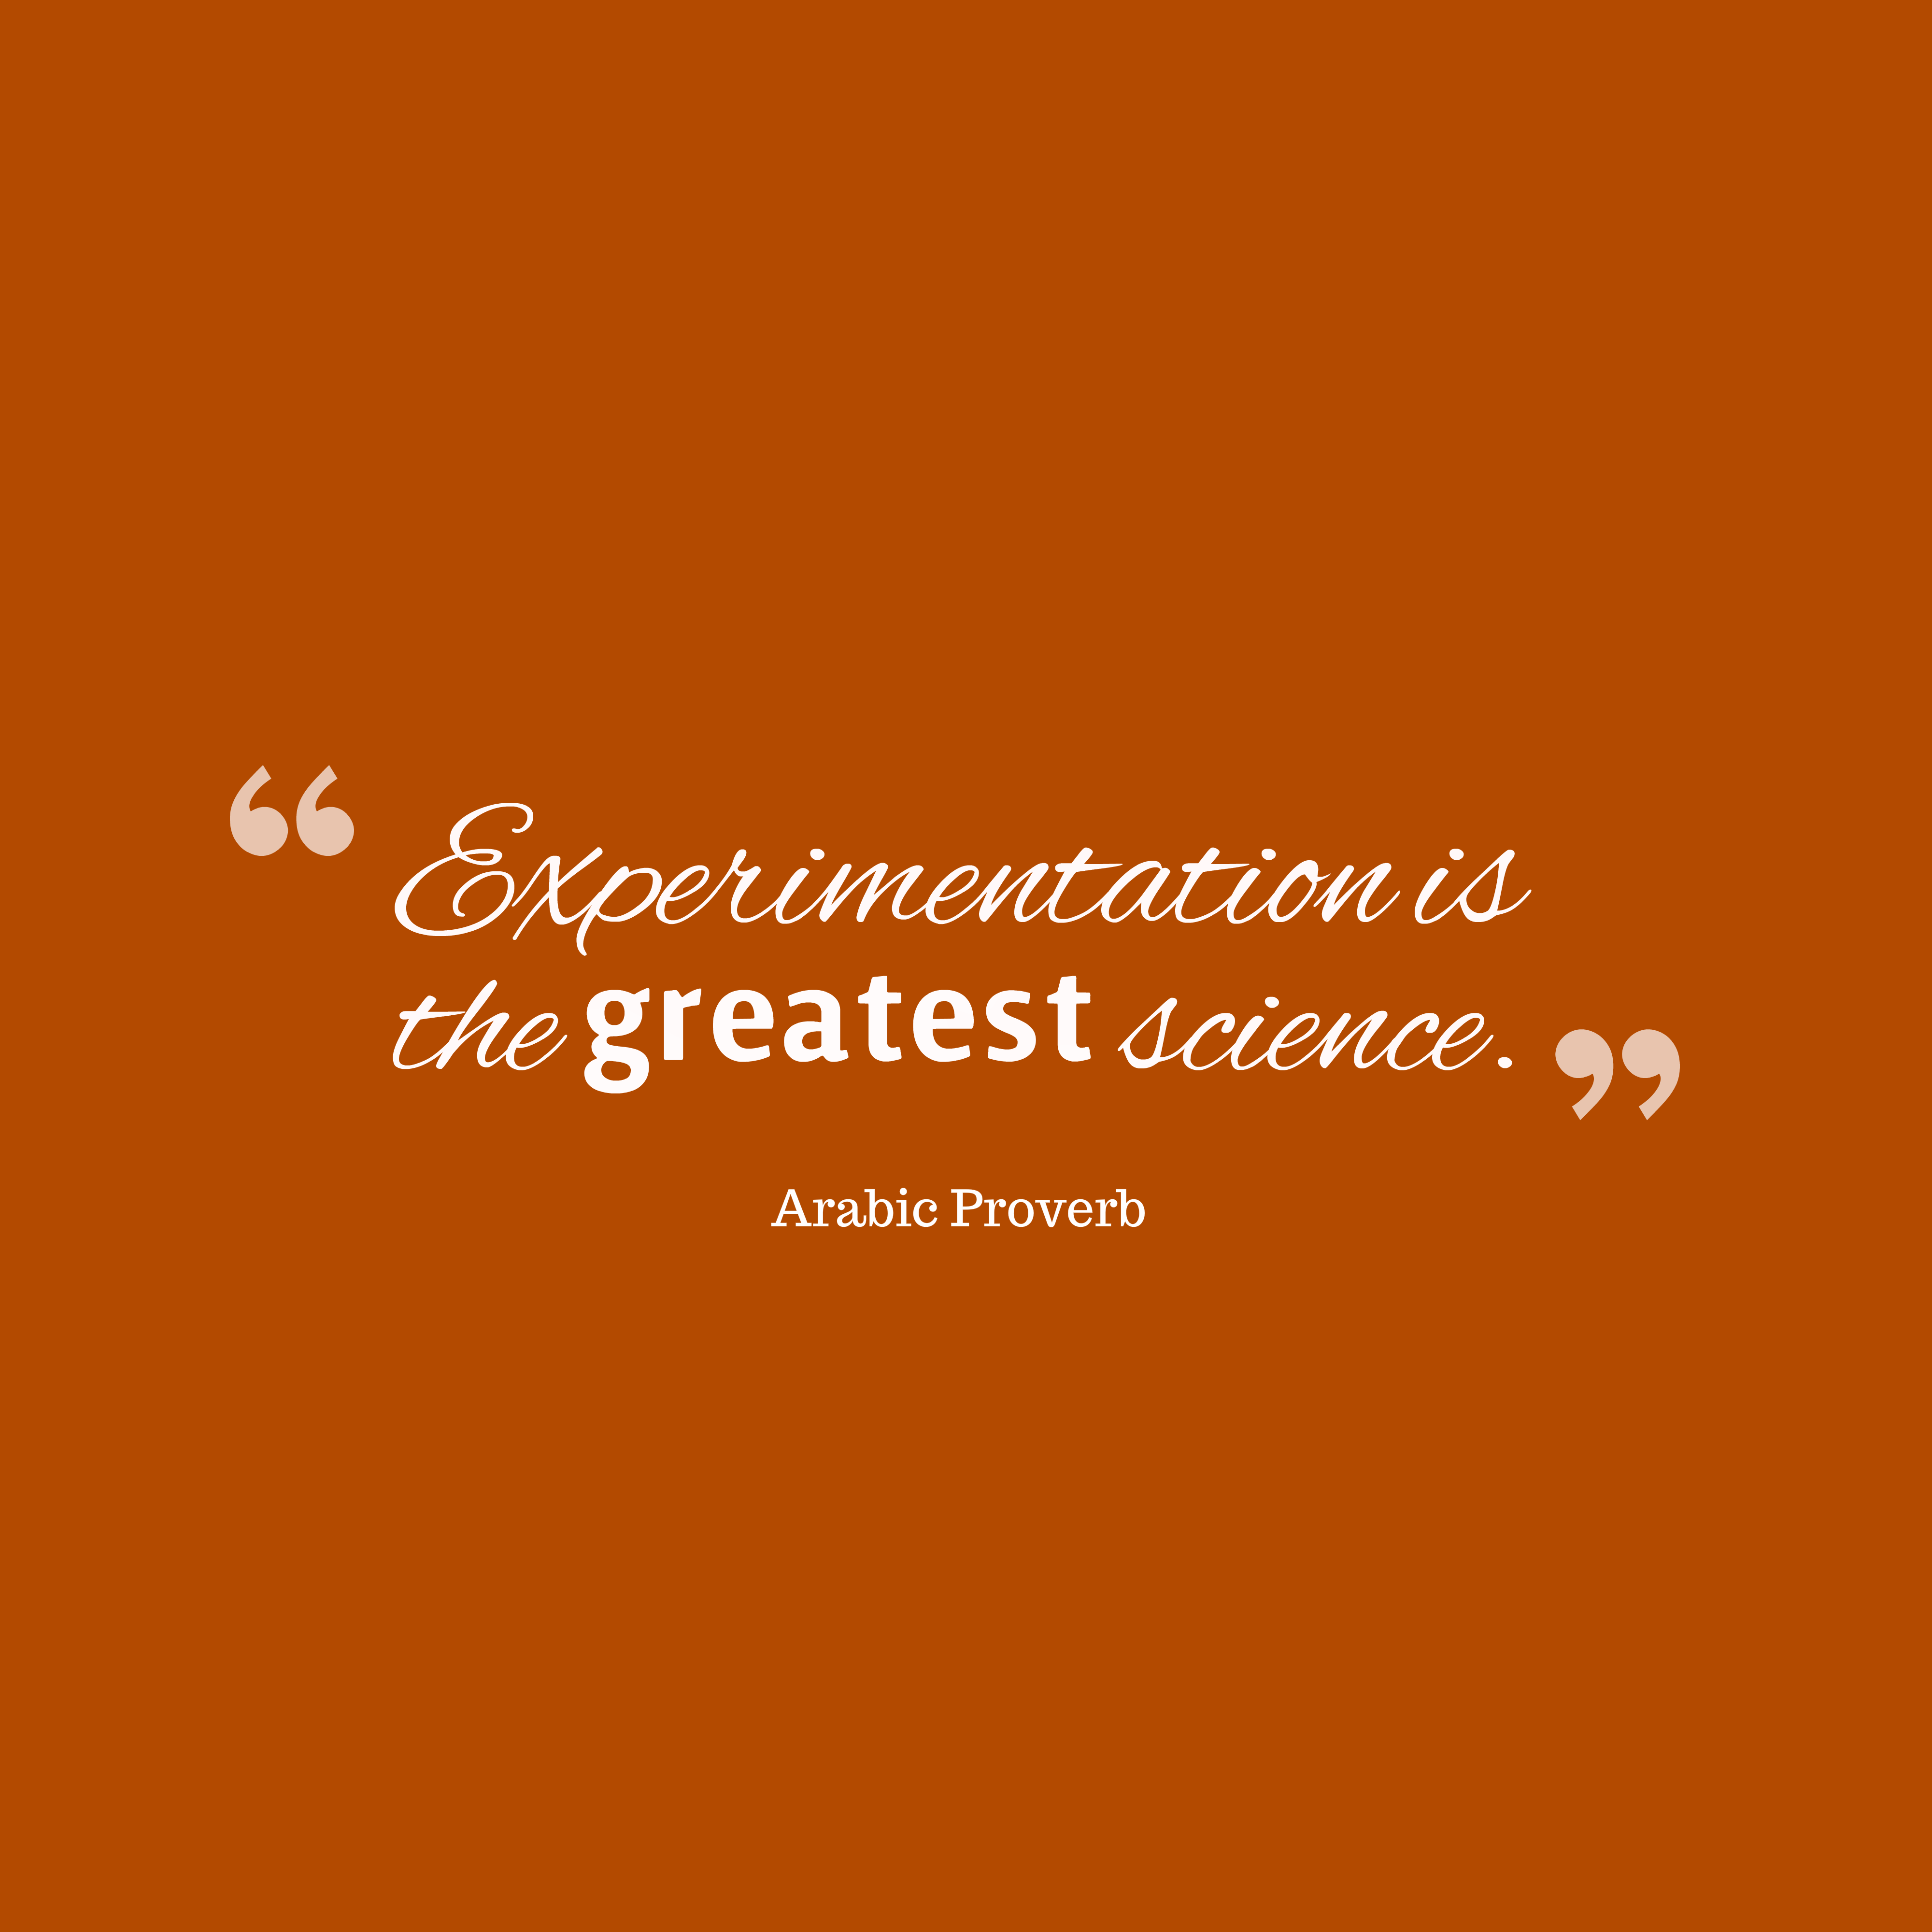 Experimentation is the greatest science. arabic proverb